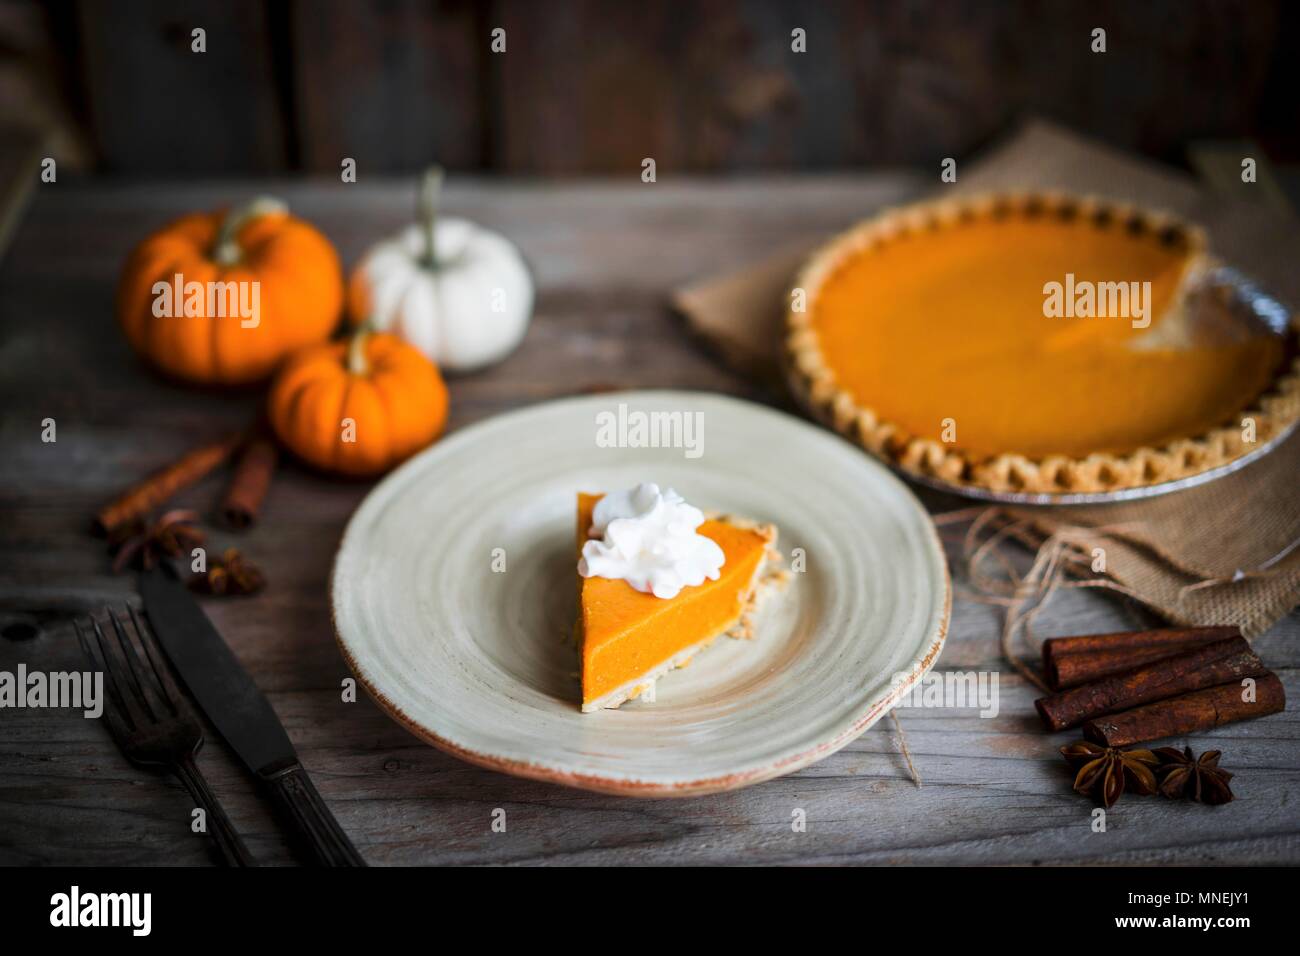 Pumpkin pie on rustic wooden surface Stock Photo